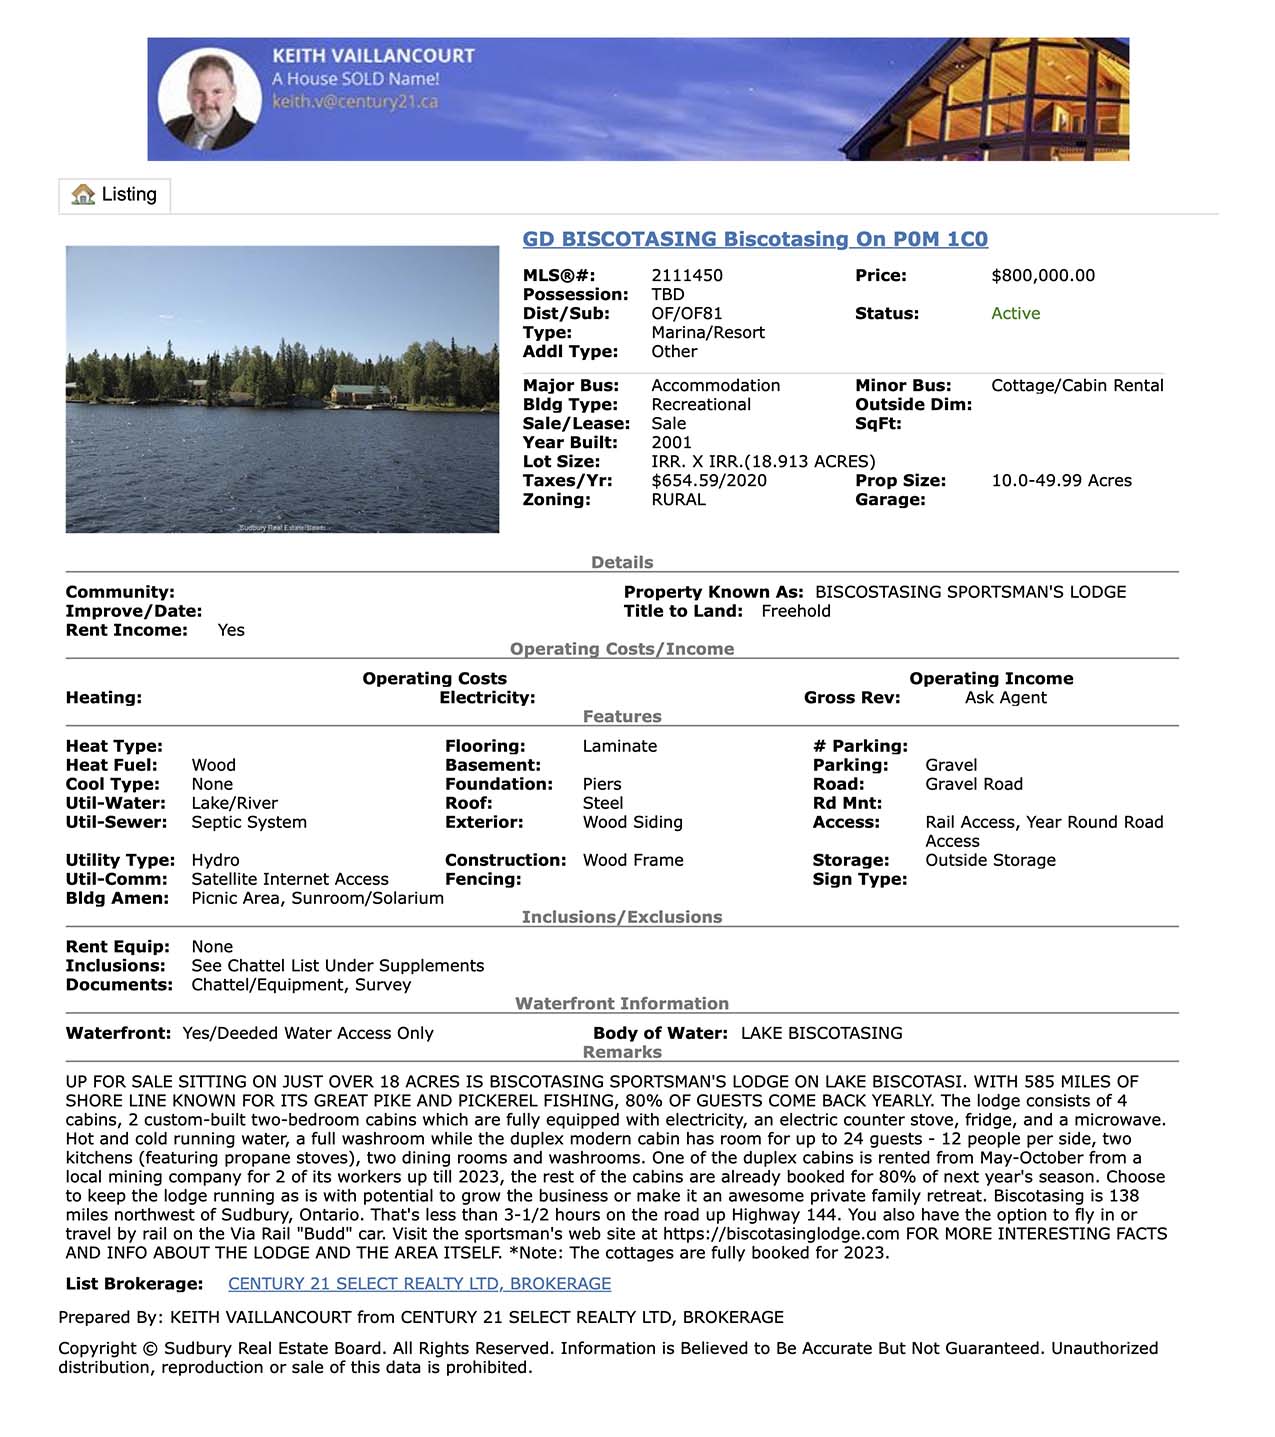 Image link to the Biscotasing Sportsman Lodge is For Sale Client Listing Sheet PDF